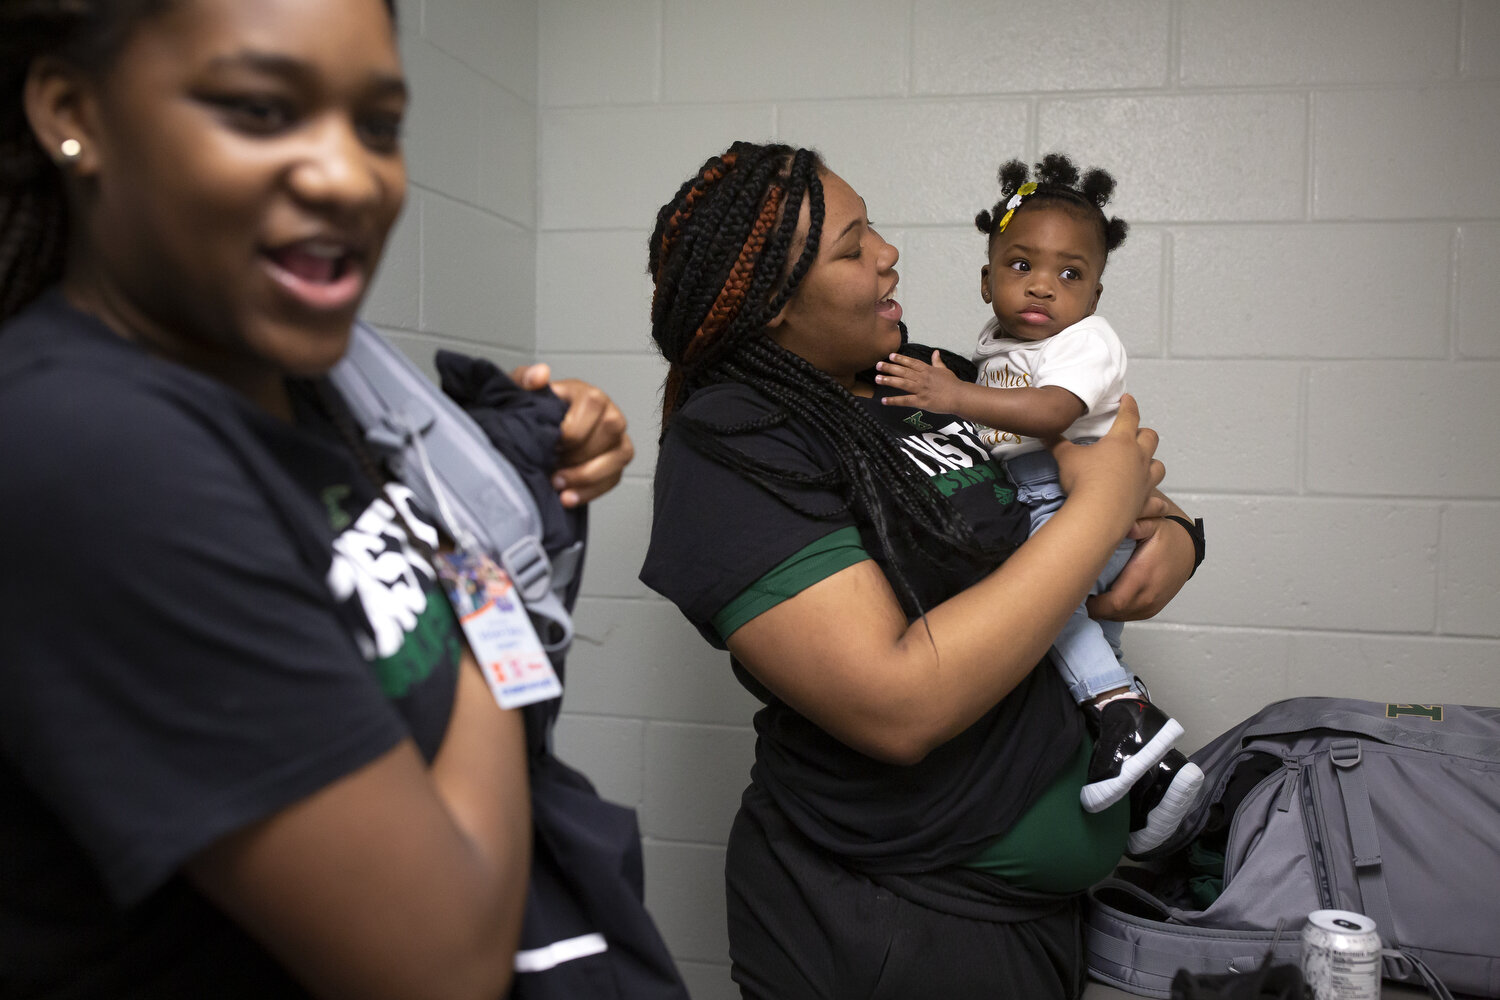  Anzaryia Cobb, center, holds her niece, right, while she and Winter Lane, left, prepare to leave the locker room following the team's loss in the Regional Championship game. The round of regional championship games were the last games to be played b